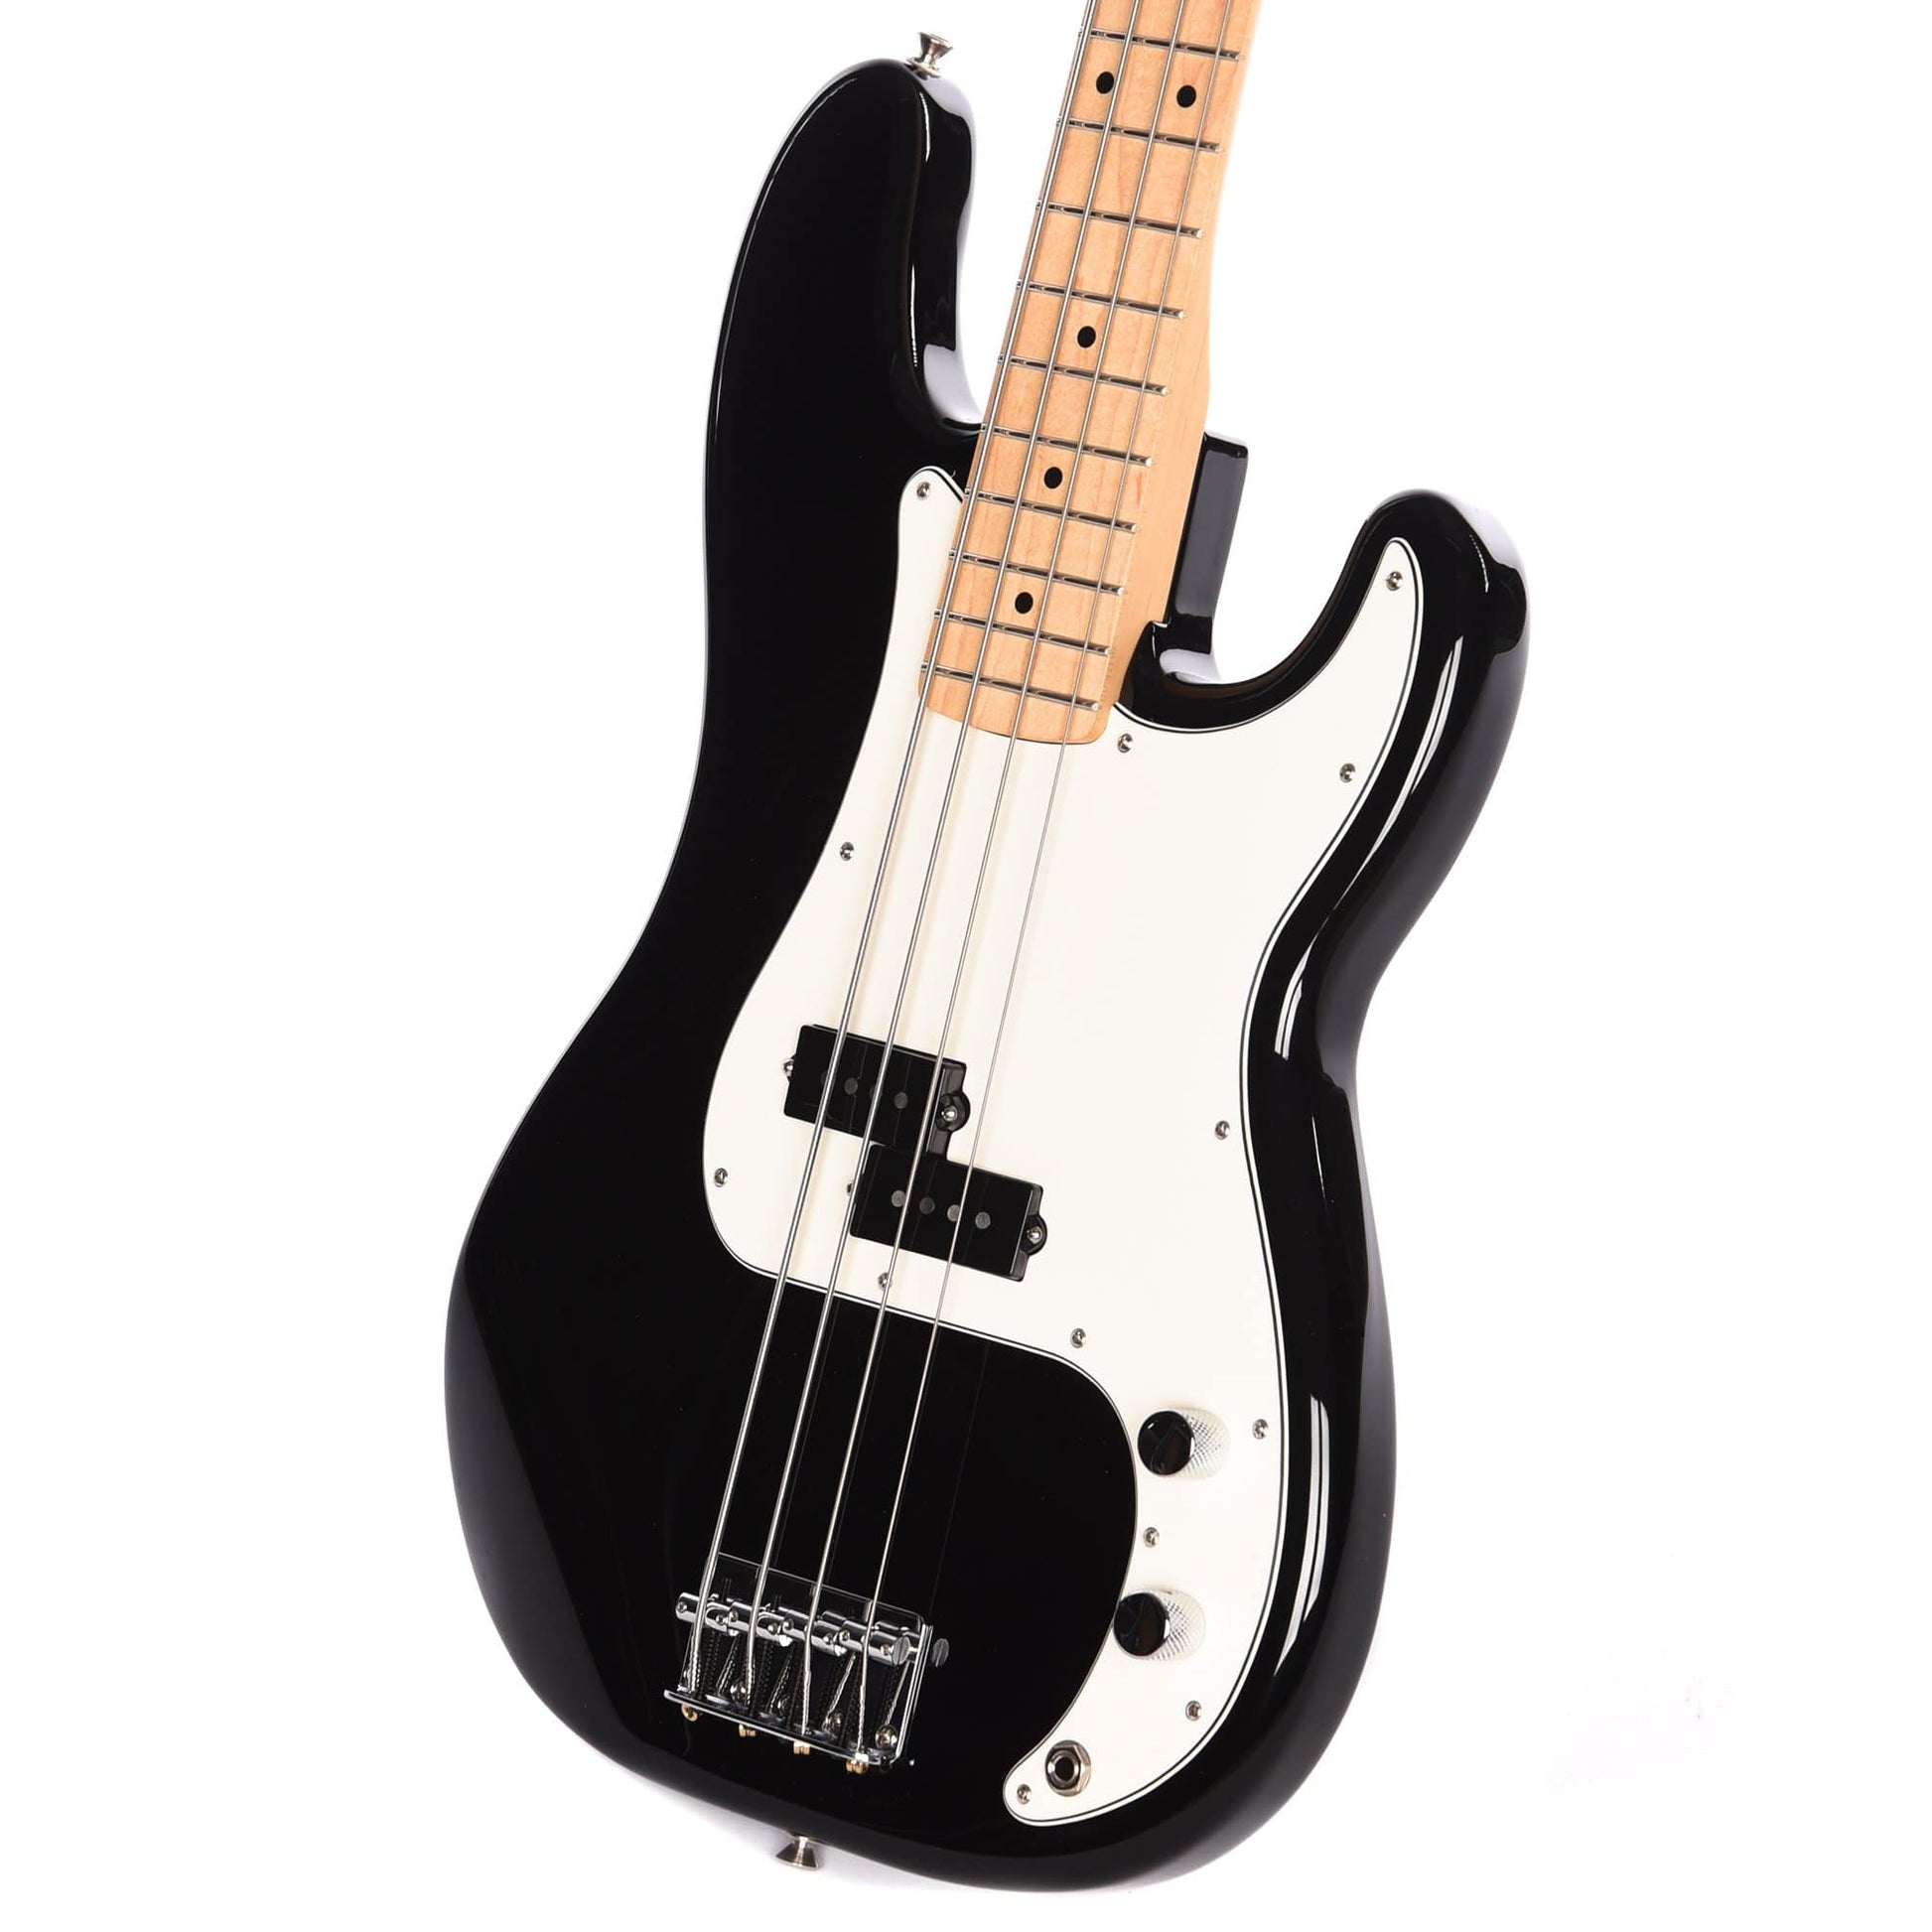 Fender Player Precision Bass Black Bundle w/Fender Gig Bag, Stand, Cable, Tuner, Picks and Strings Bass Guitars / 4-String